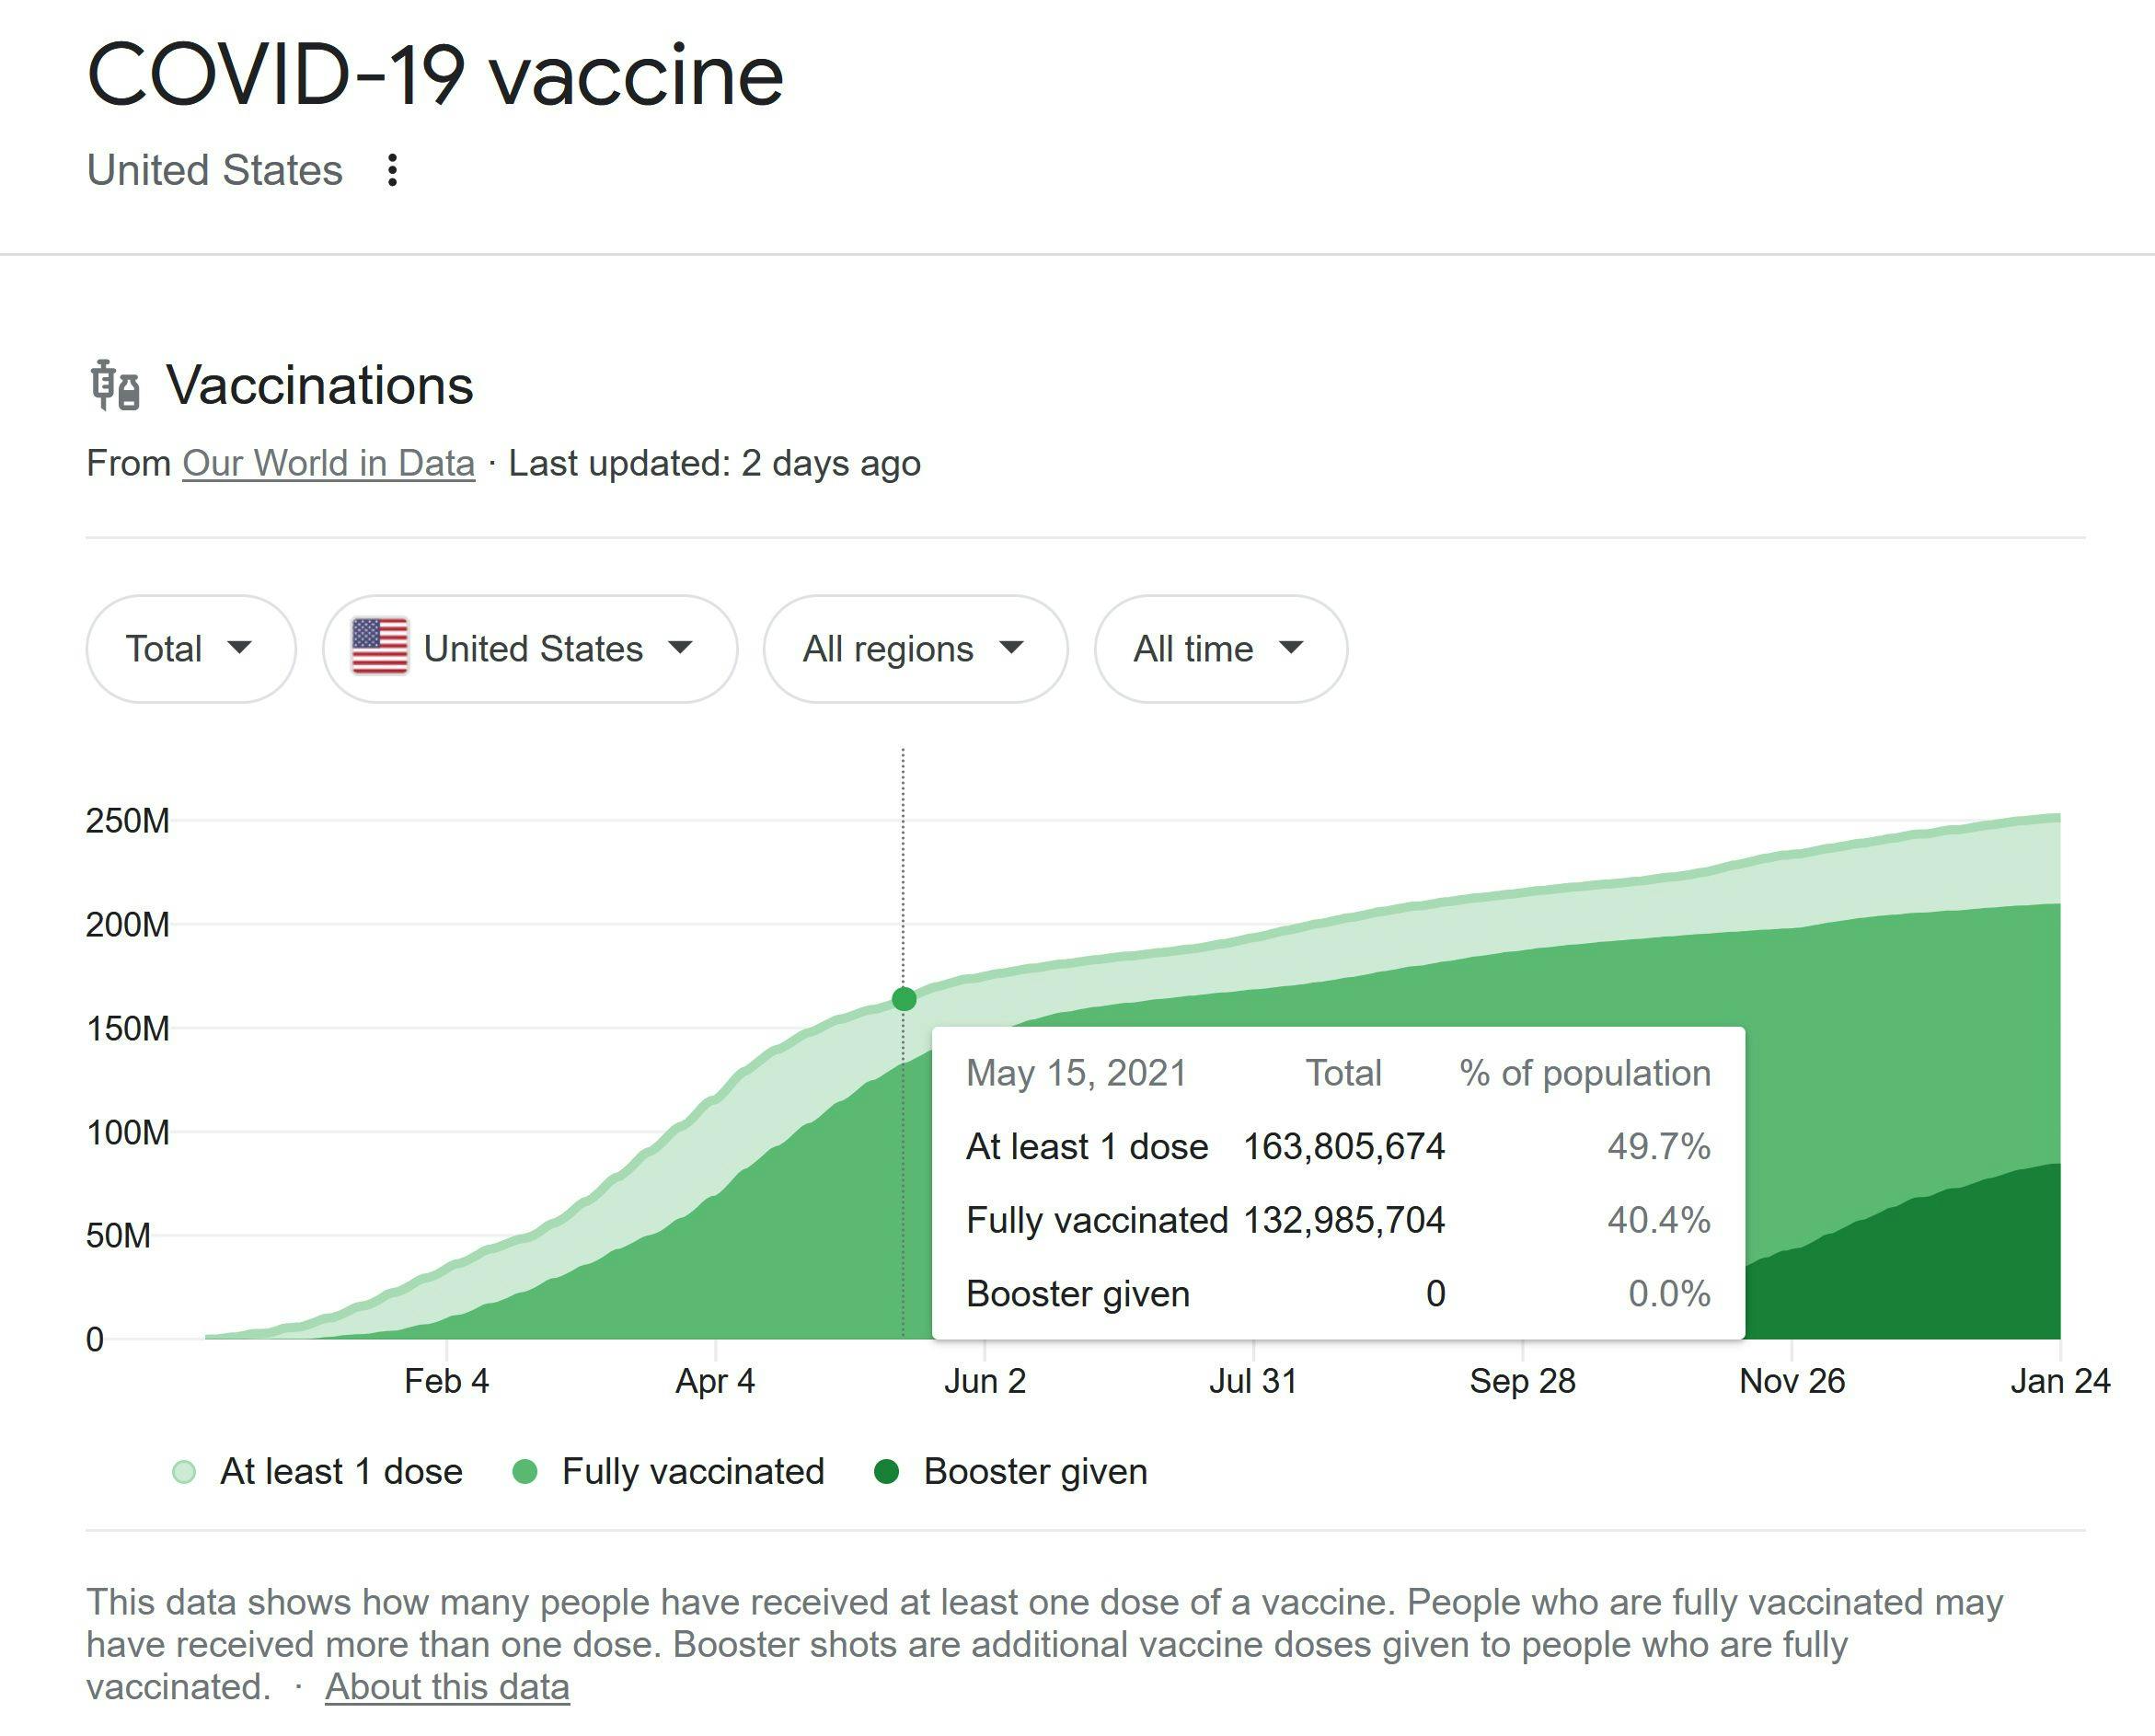 Source: Our World in Data. Accessed January 26, 2022. https://ourworldindata.org/covid-vaccinations?country=USA https://github.com/owid/covid-19-data/blob/master/public/data/vaccinations/vaccinations.csv